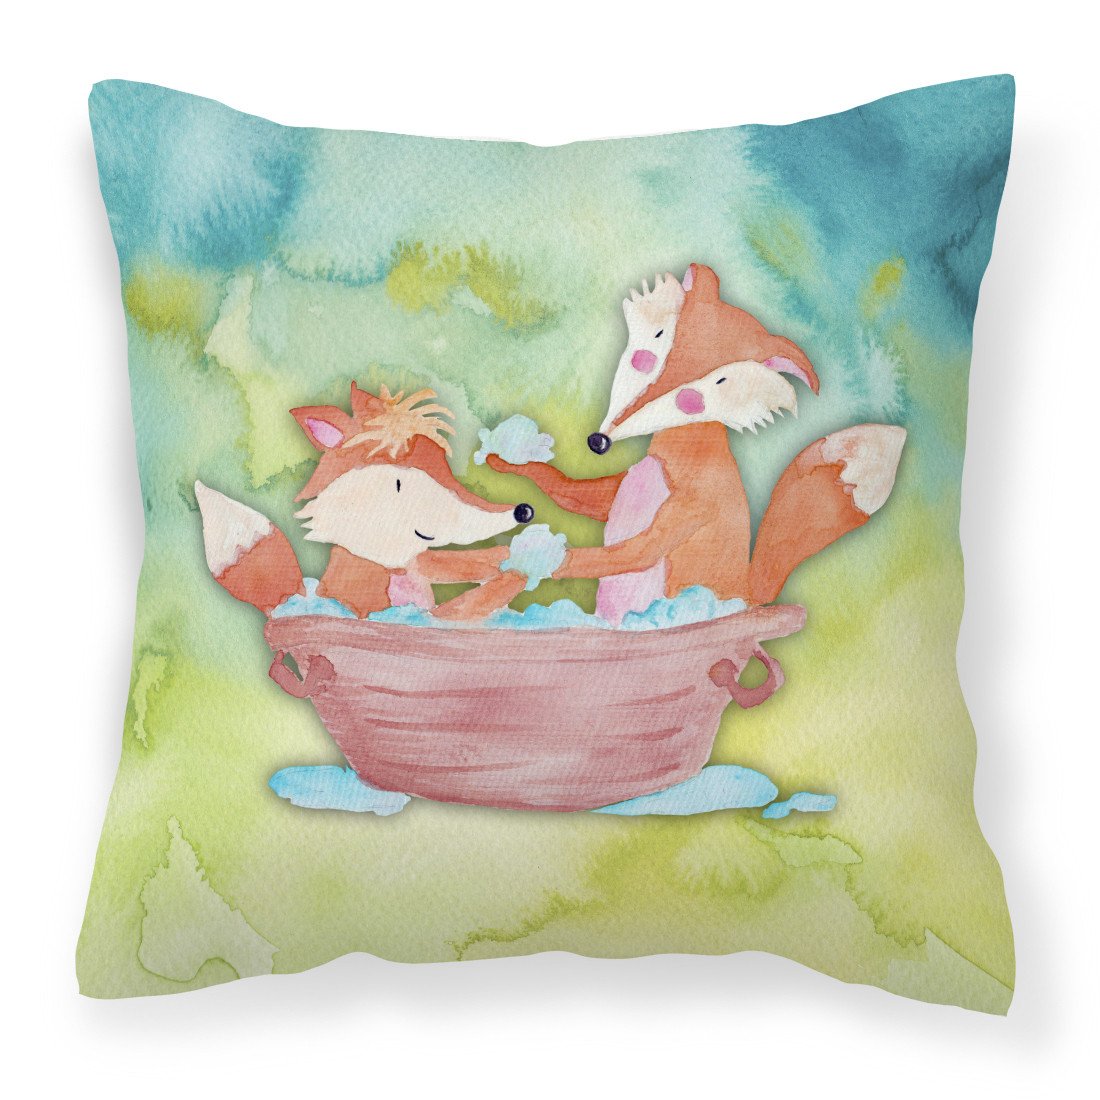 Foxes Bathing Watercolor Fabric Decorative Pillow BB7350PW1818 by Caroline's Treasures